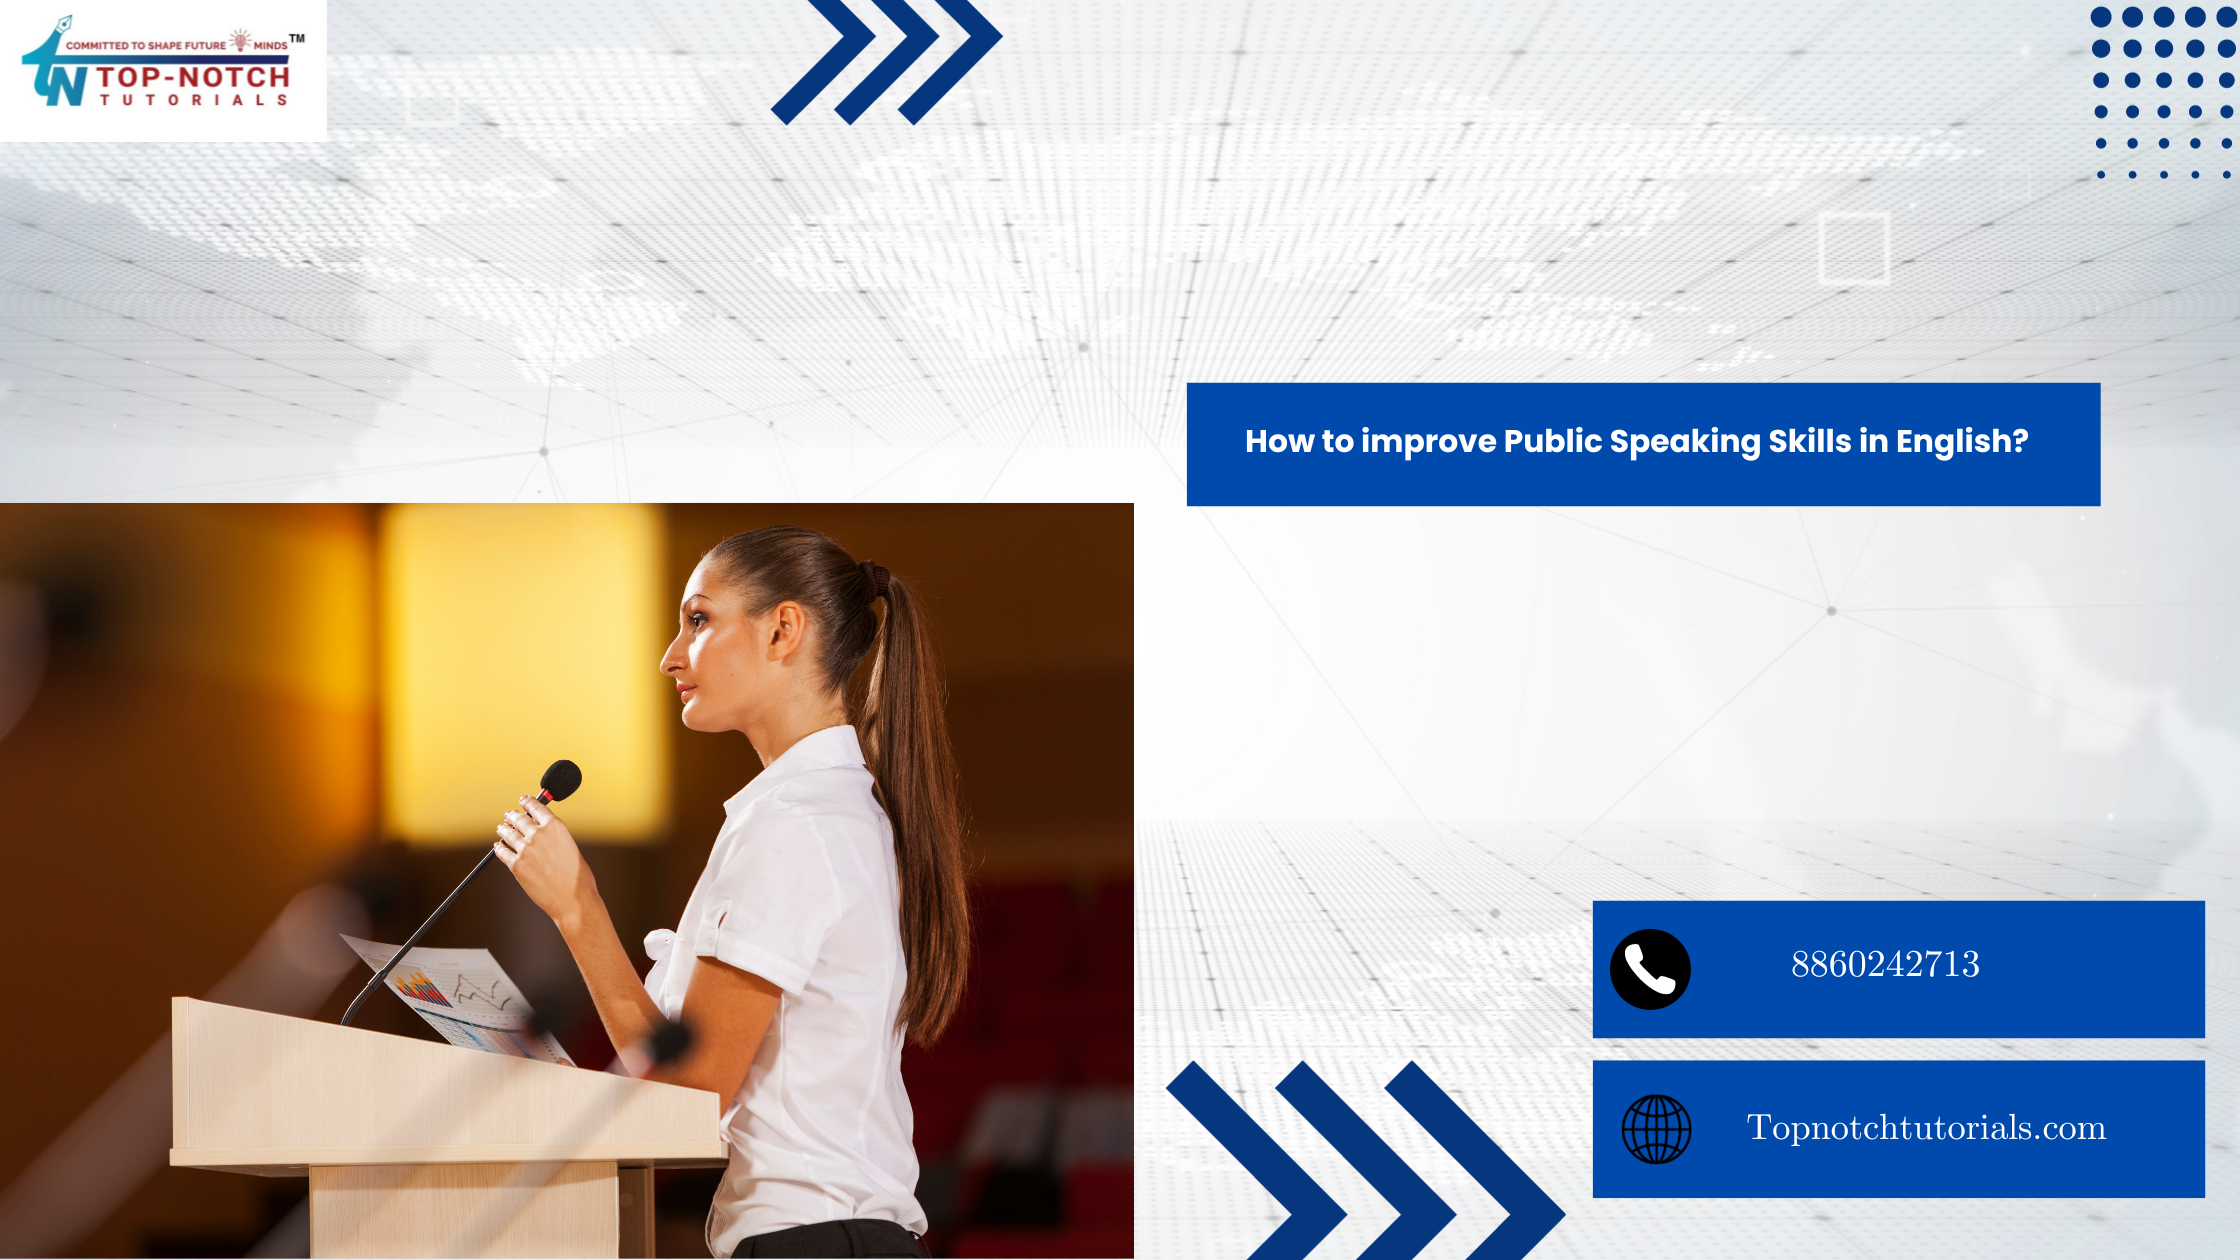 How to improve Public Speaking Skills in English?